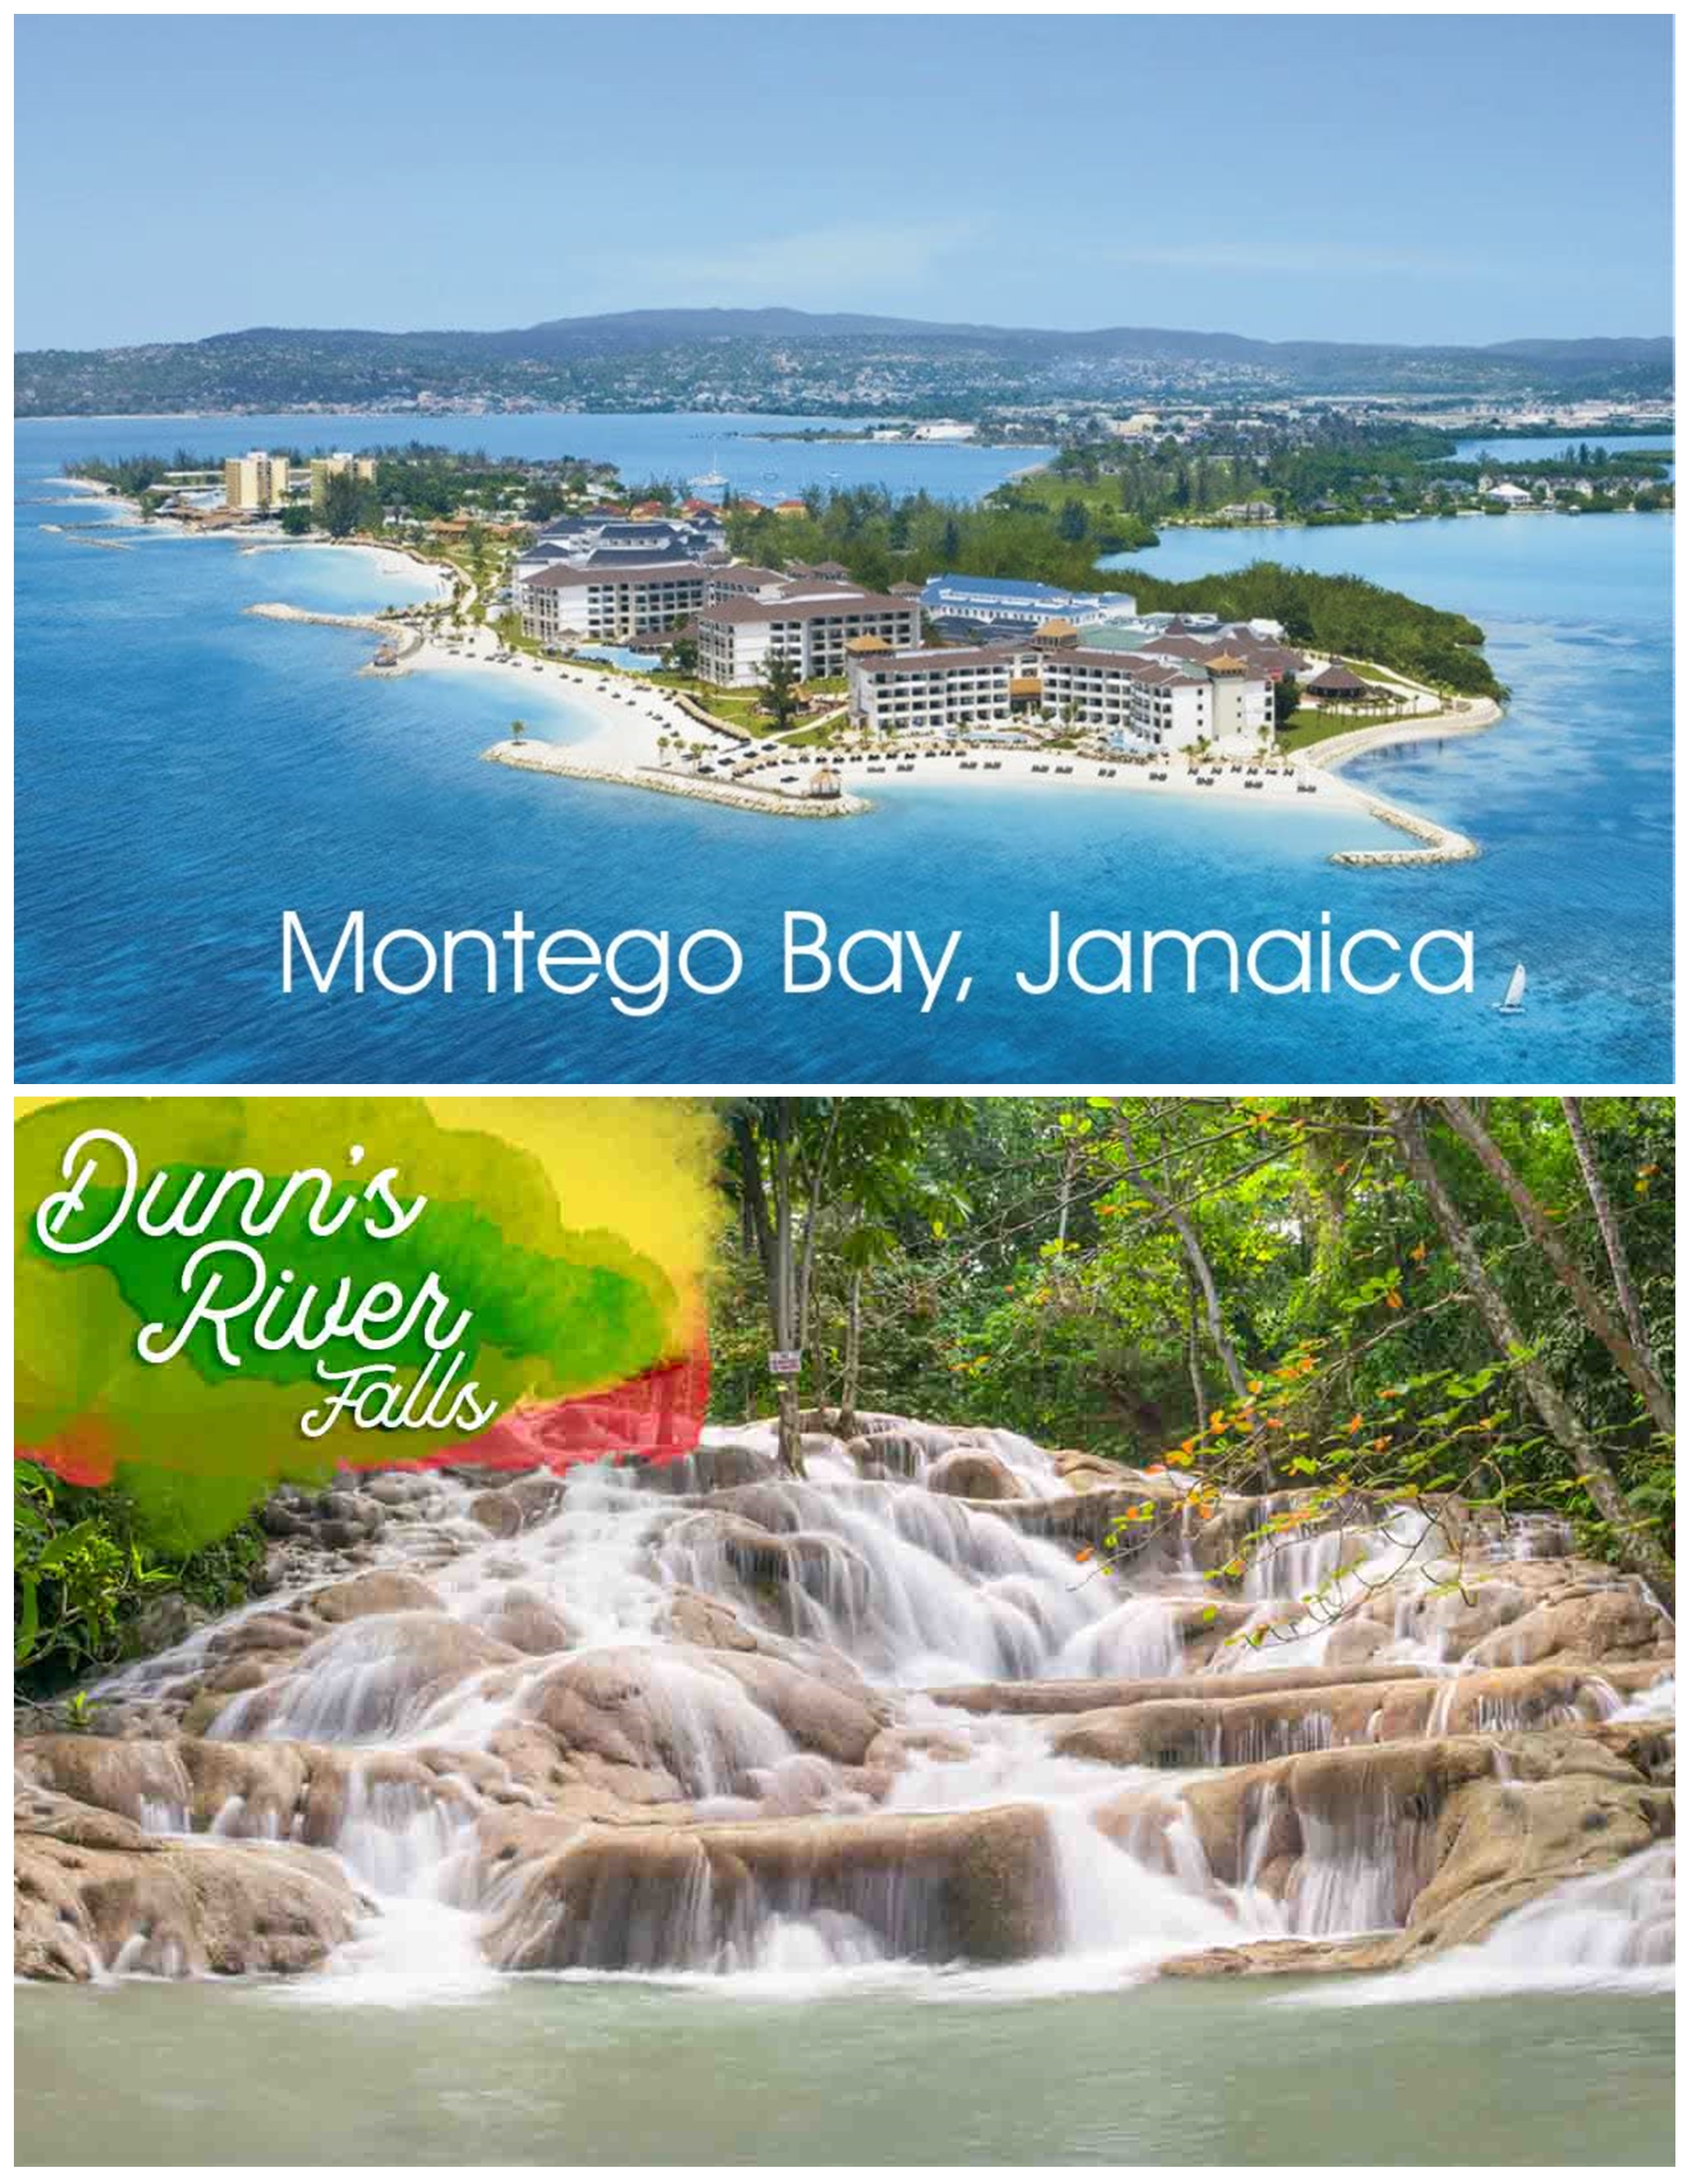 From Montego Bay Hotels on North Course HWY - Dunn's River Falls ( Round Trip)